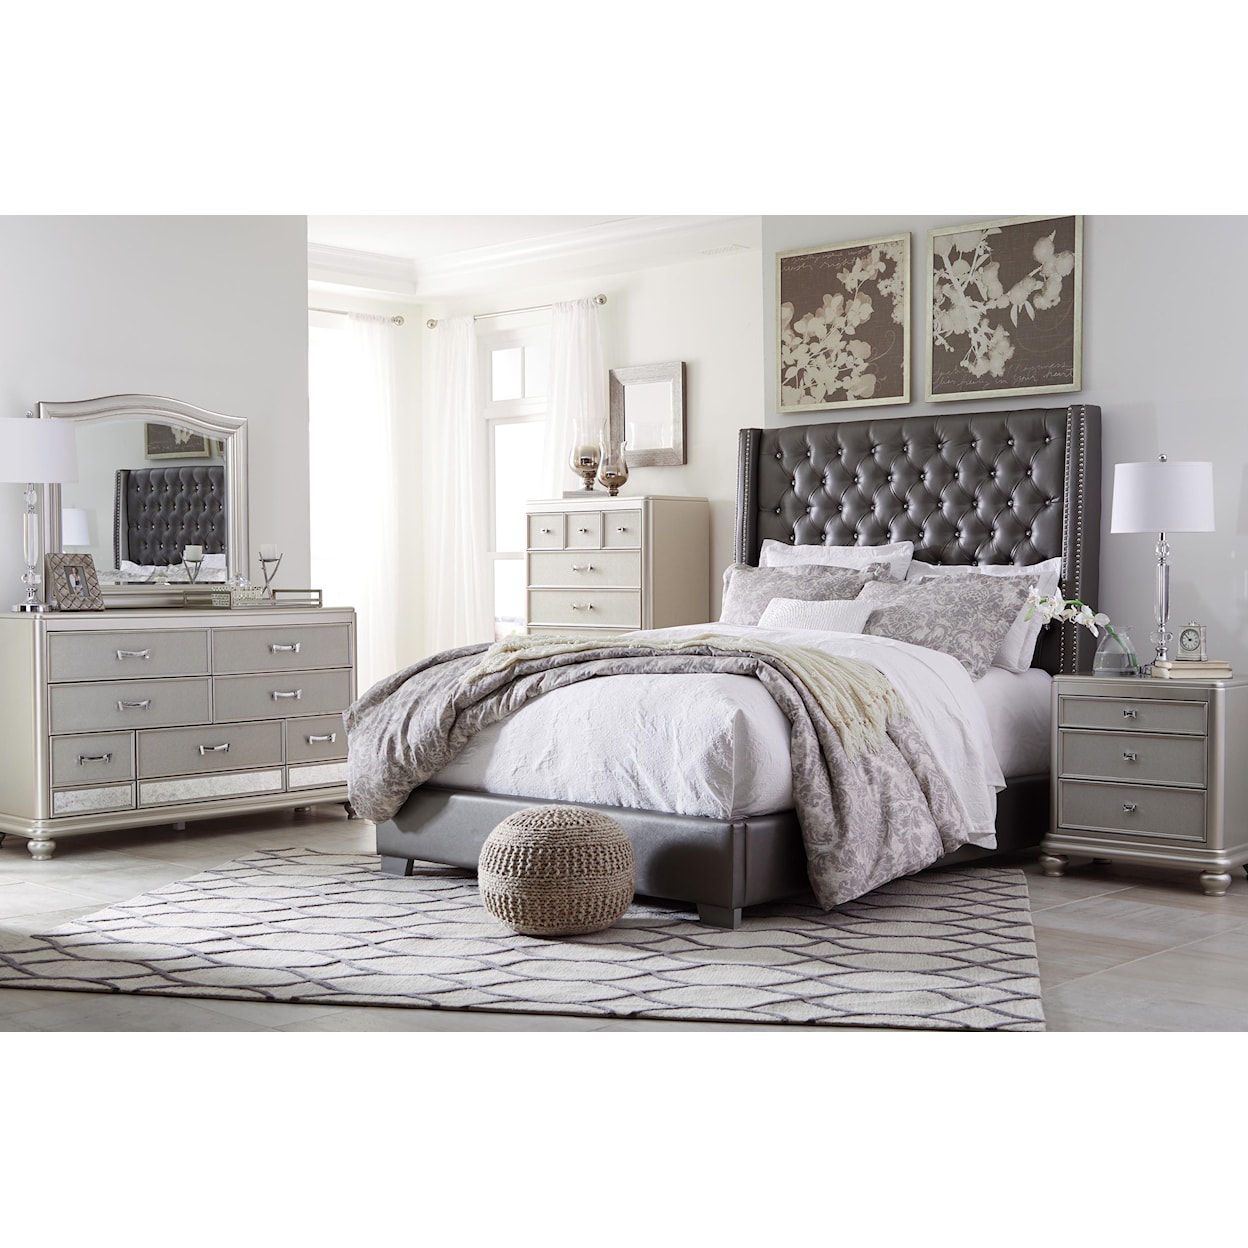 Signature Design by Ashley Coralayne 6 Piece Upholstered Queen Bedroom Set